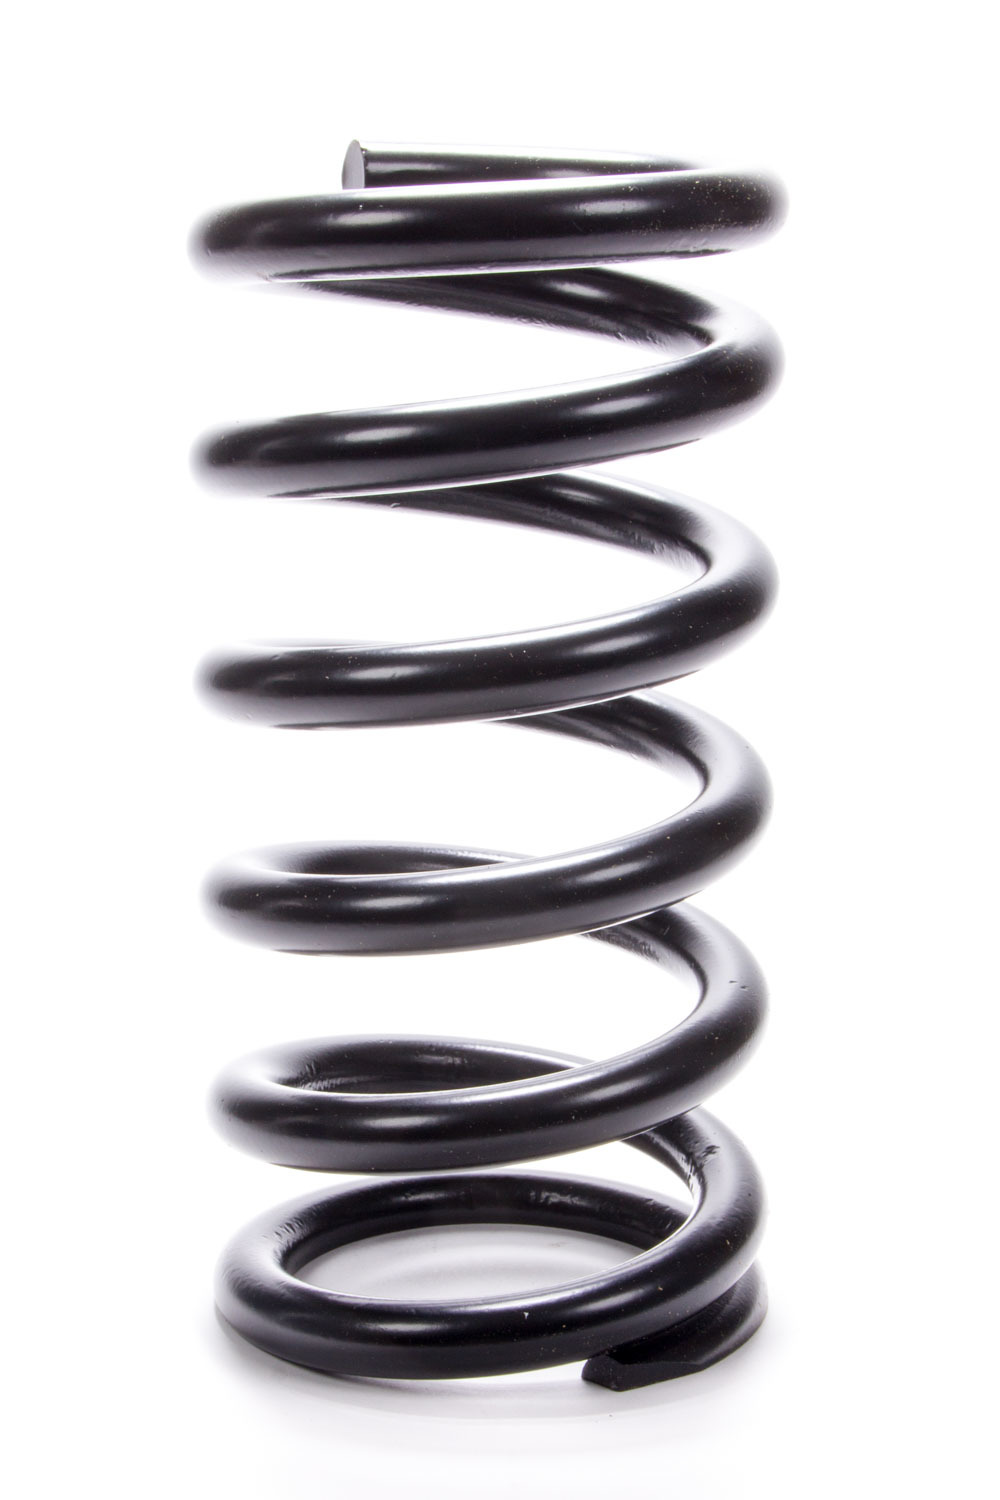 AFCO Racing Products 20800-6 Coil Spring, Conventional, 5.5 in OD, 11.000 in Length, 800 lb/in Spring Rate, Front, Stock Appearing, Steel, Black Powder Coat, Each